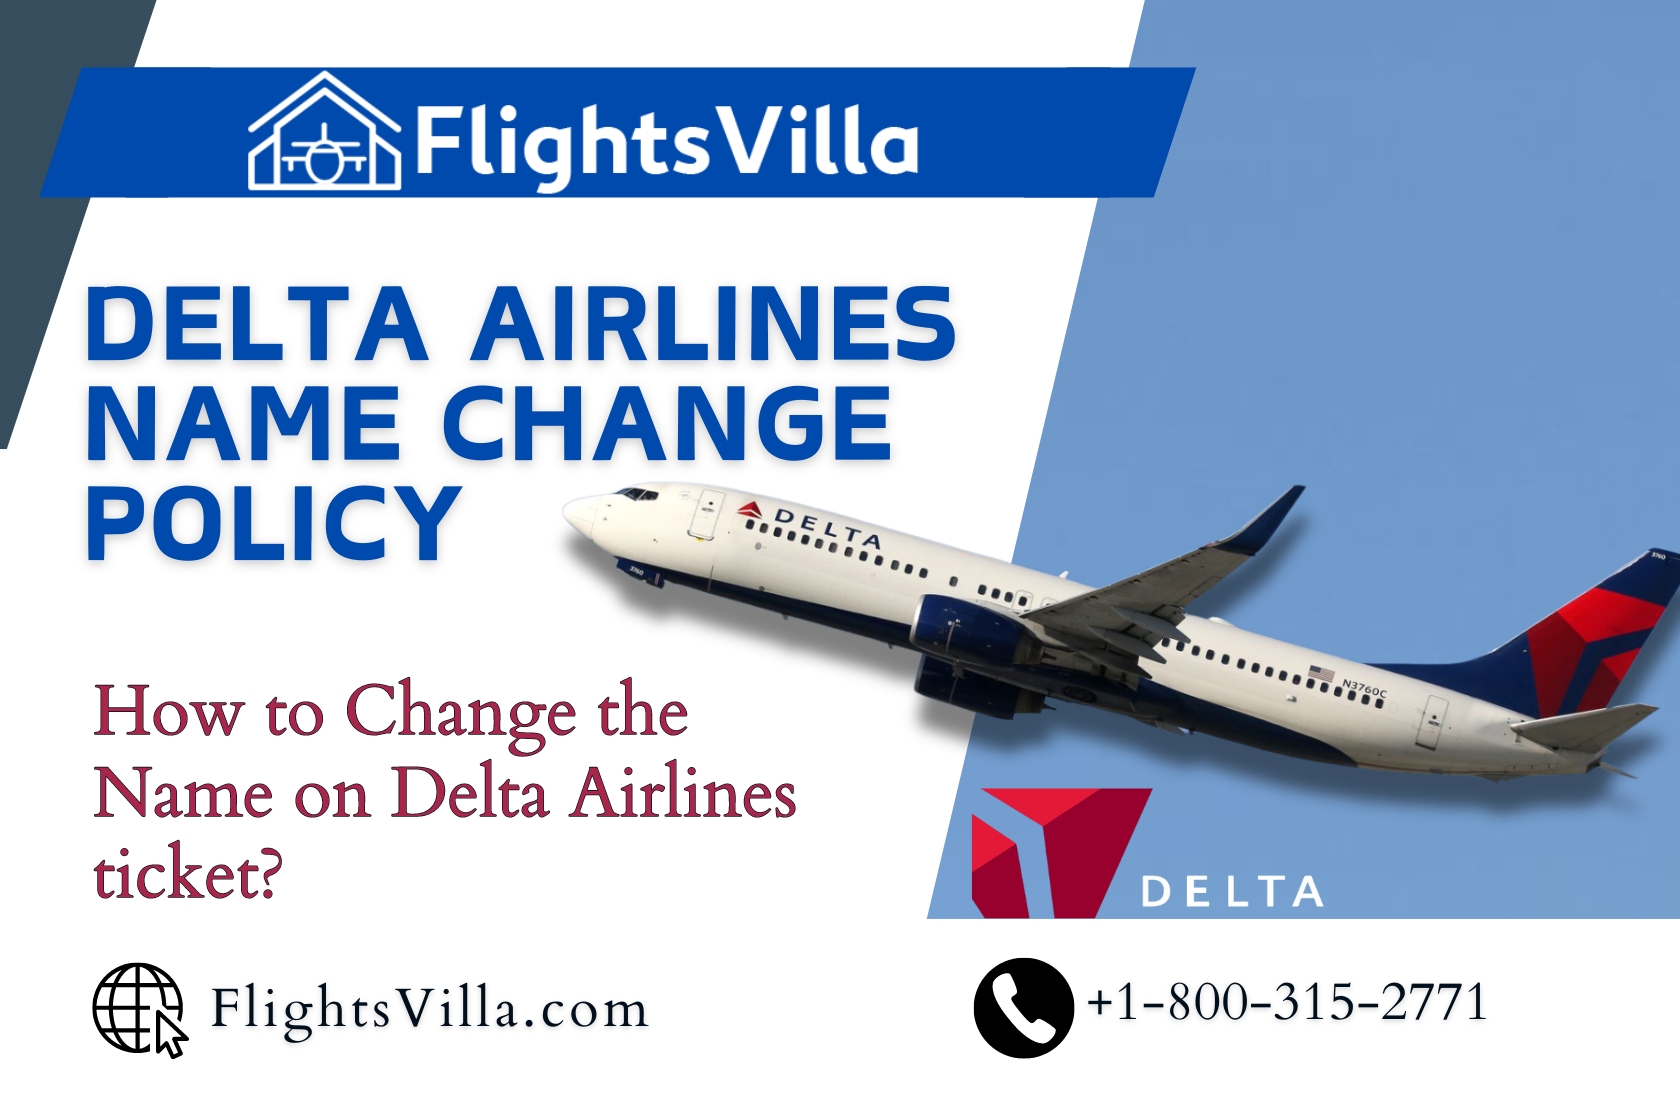 How to Change the Name on Delta Airlines ticket